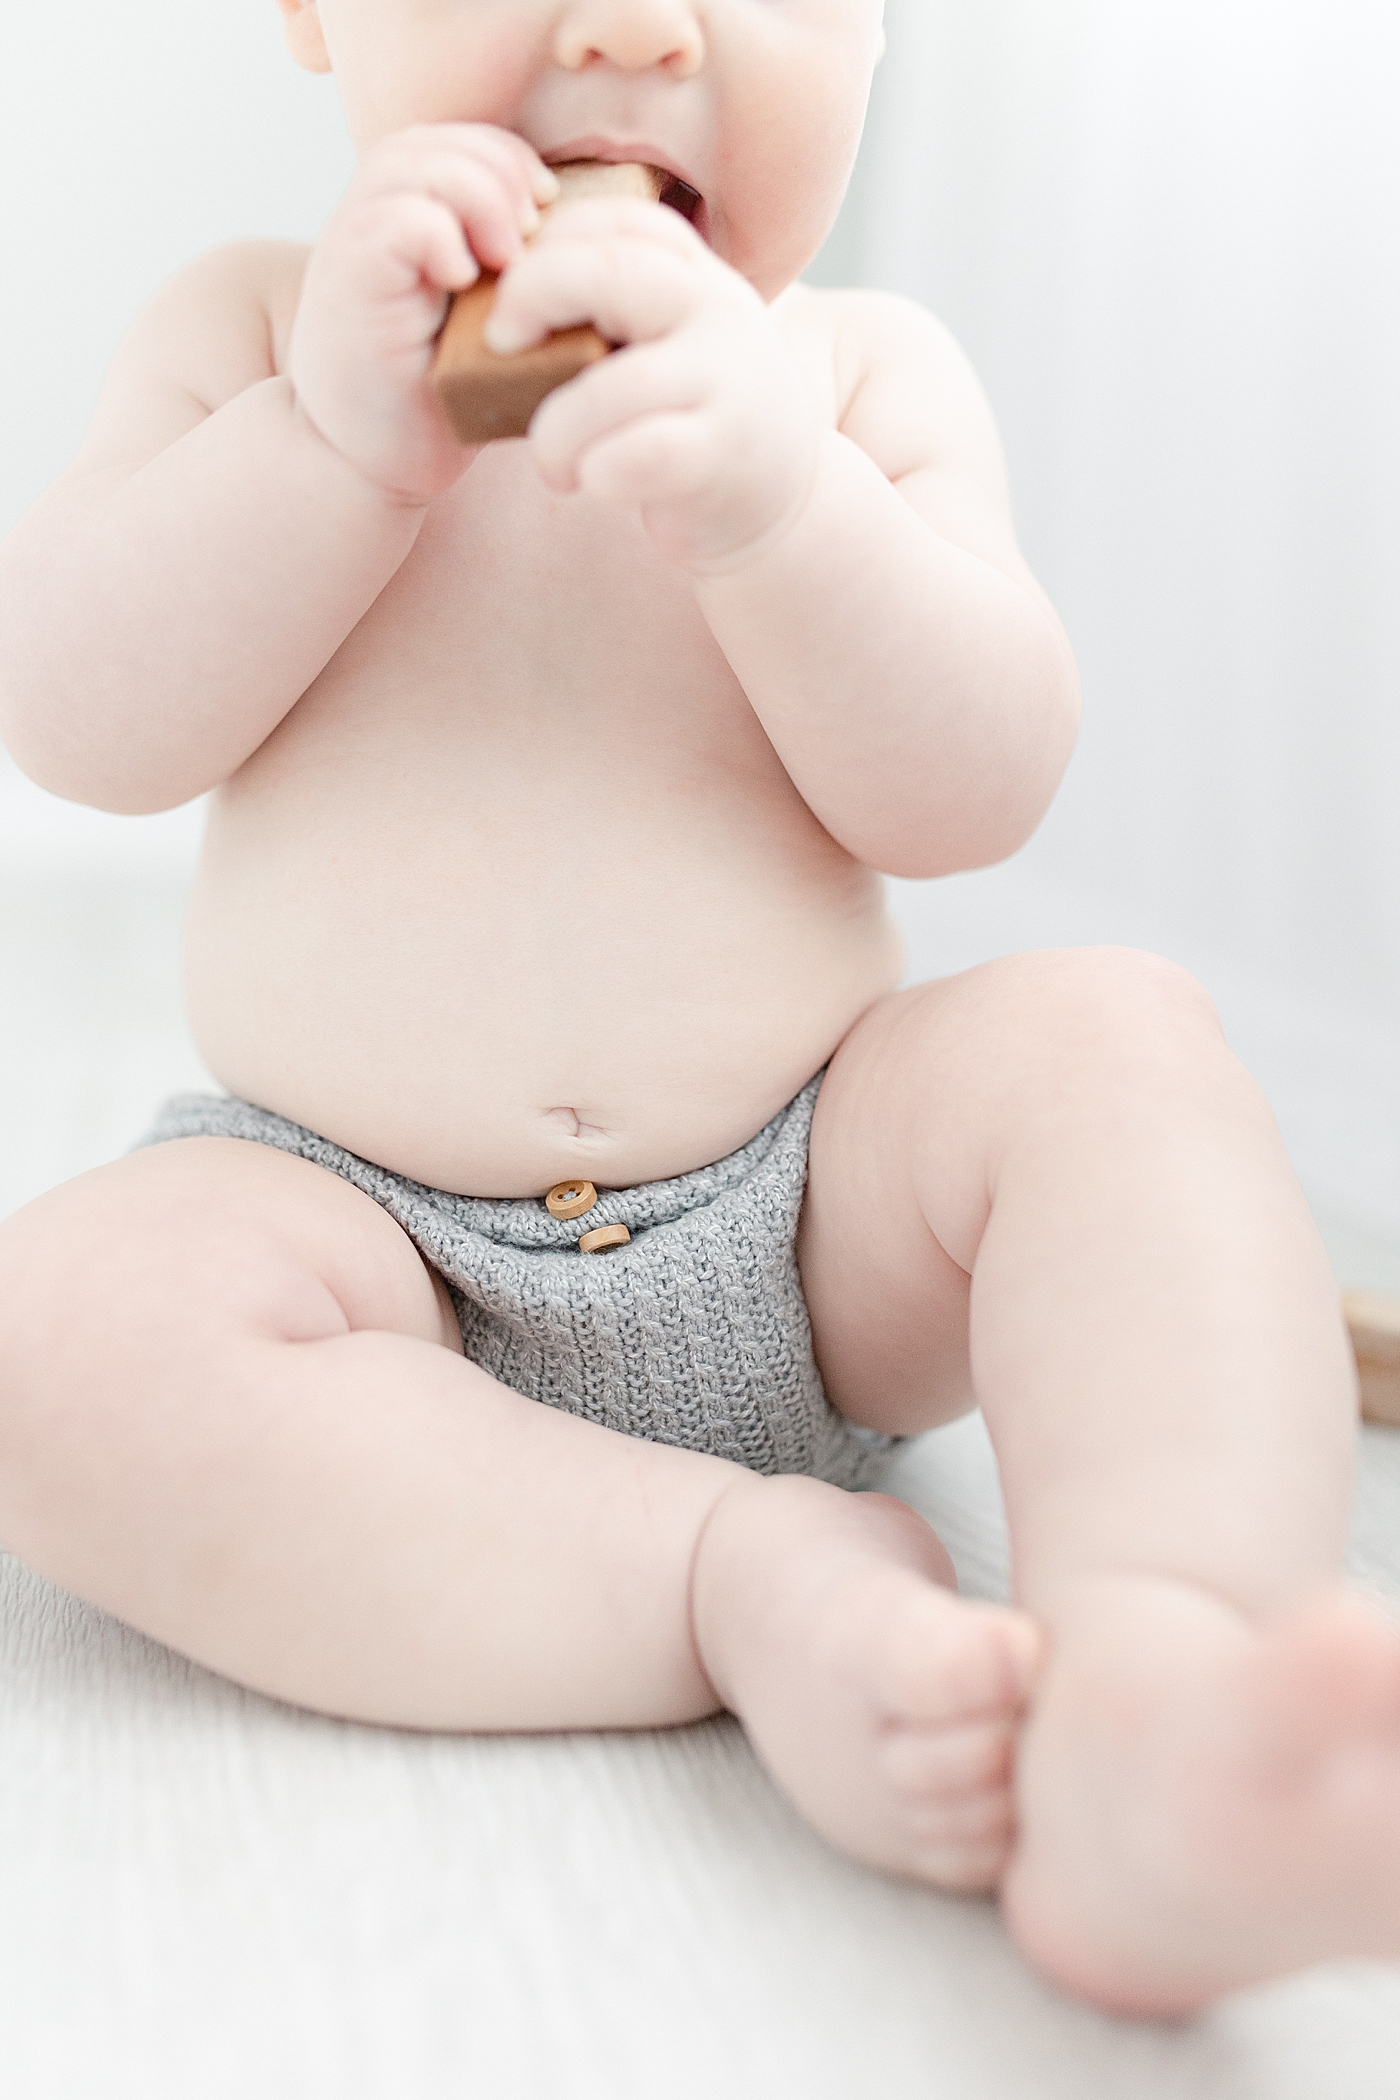 Baby boy in bloomers chewing on wooden blocks | Photo by Hattiesburg Baby Photographer Little Sunshine Photography